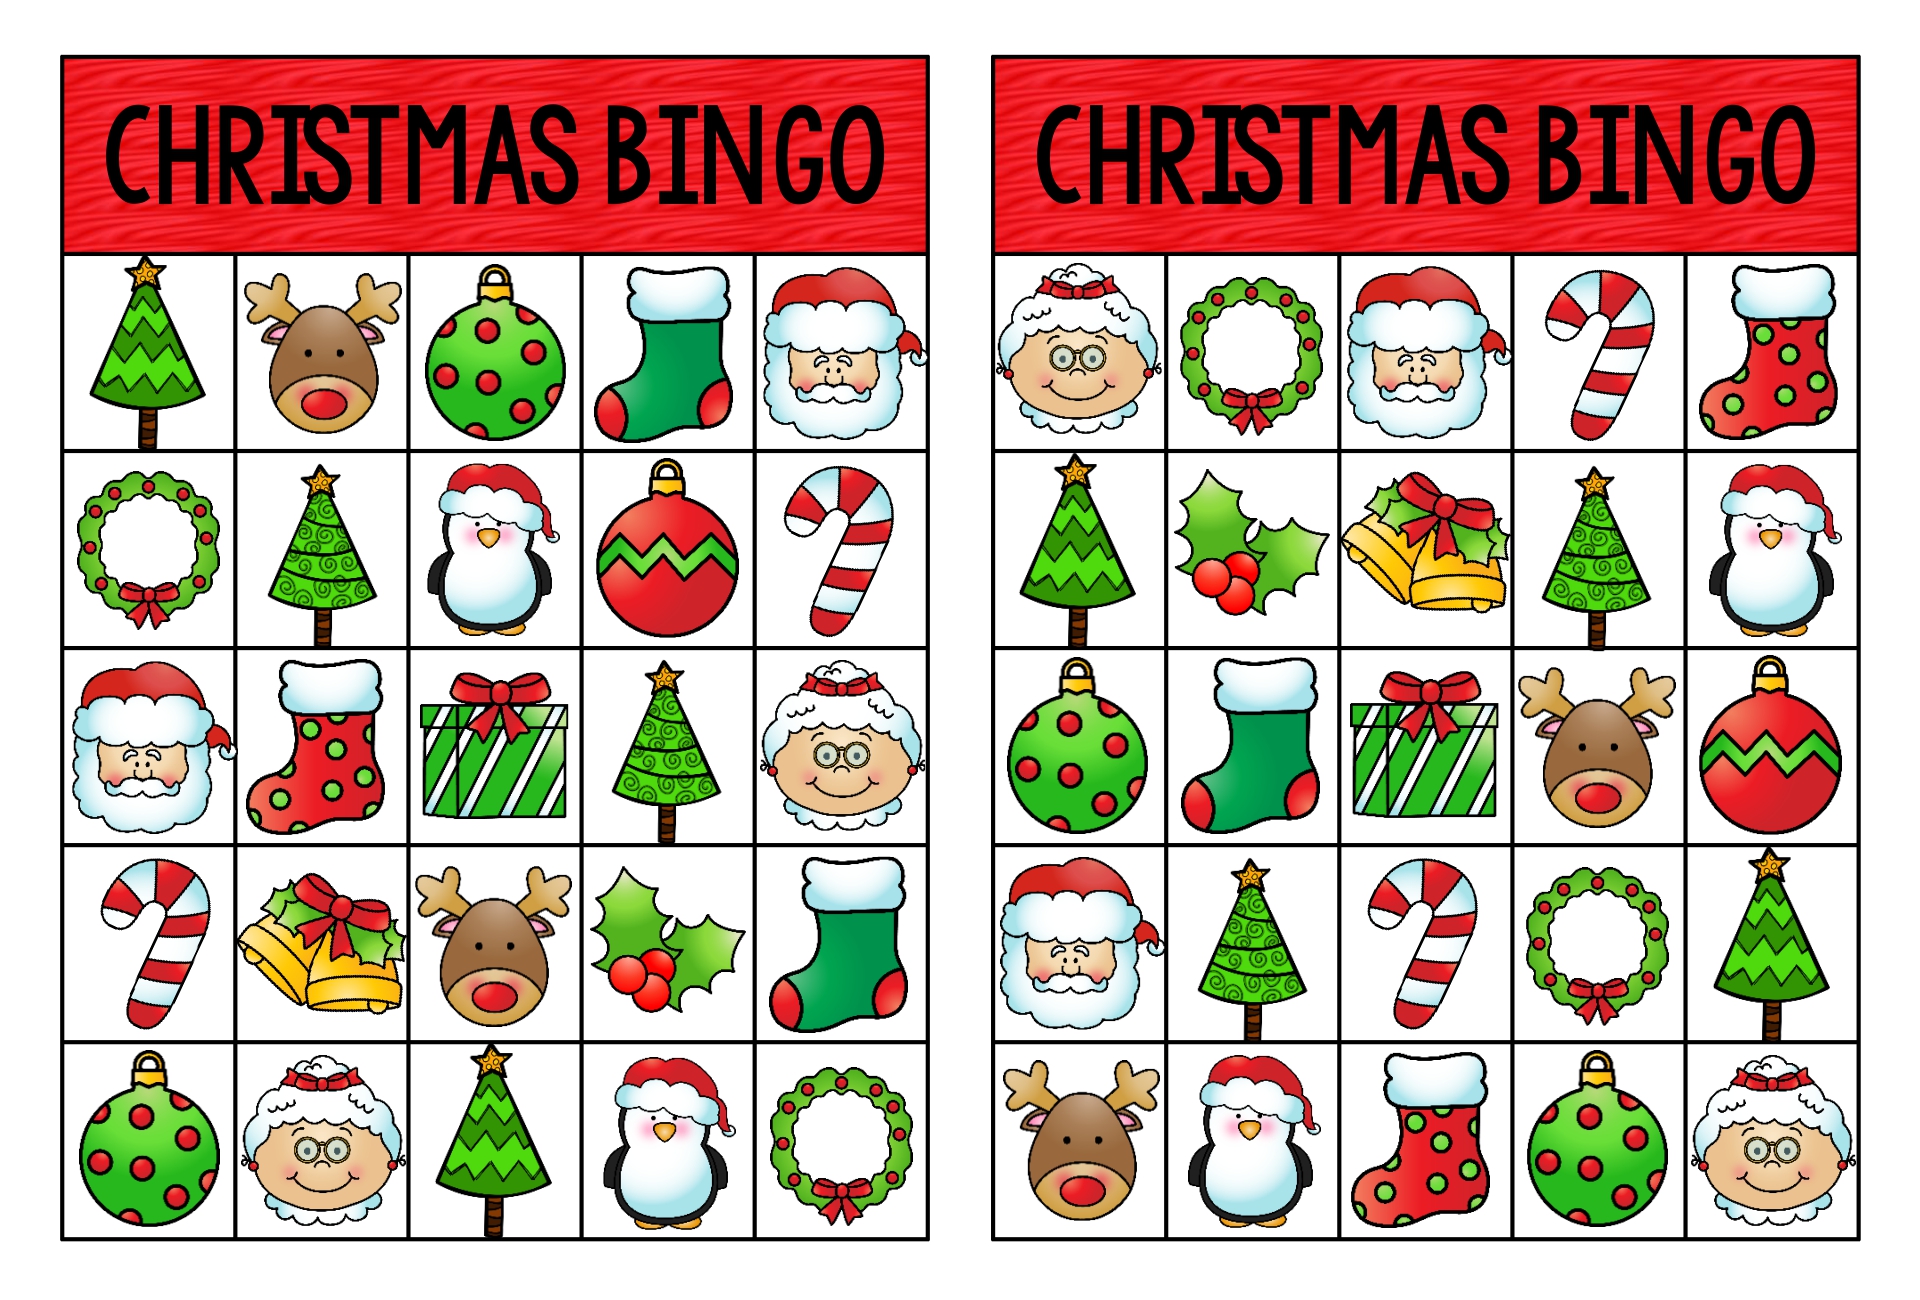 500-christmas-bingo-cards-pdf-download-1-and-2-per-page-etsy